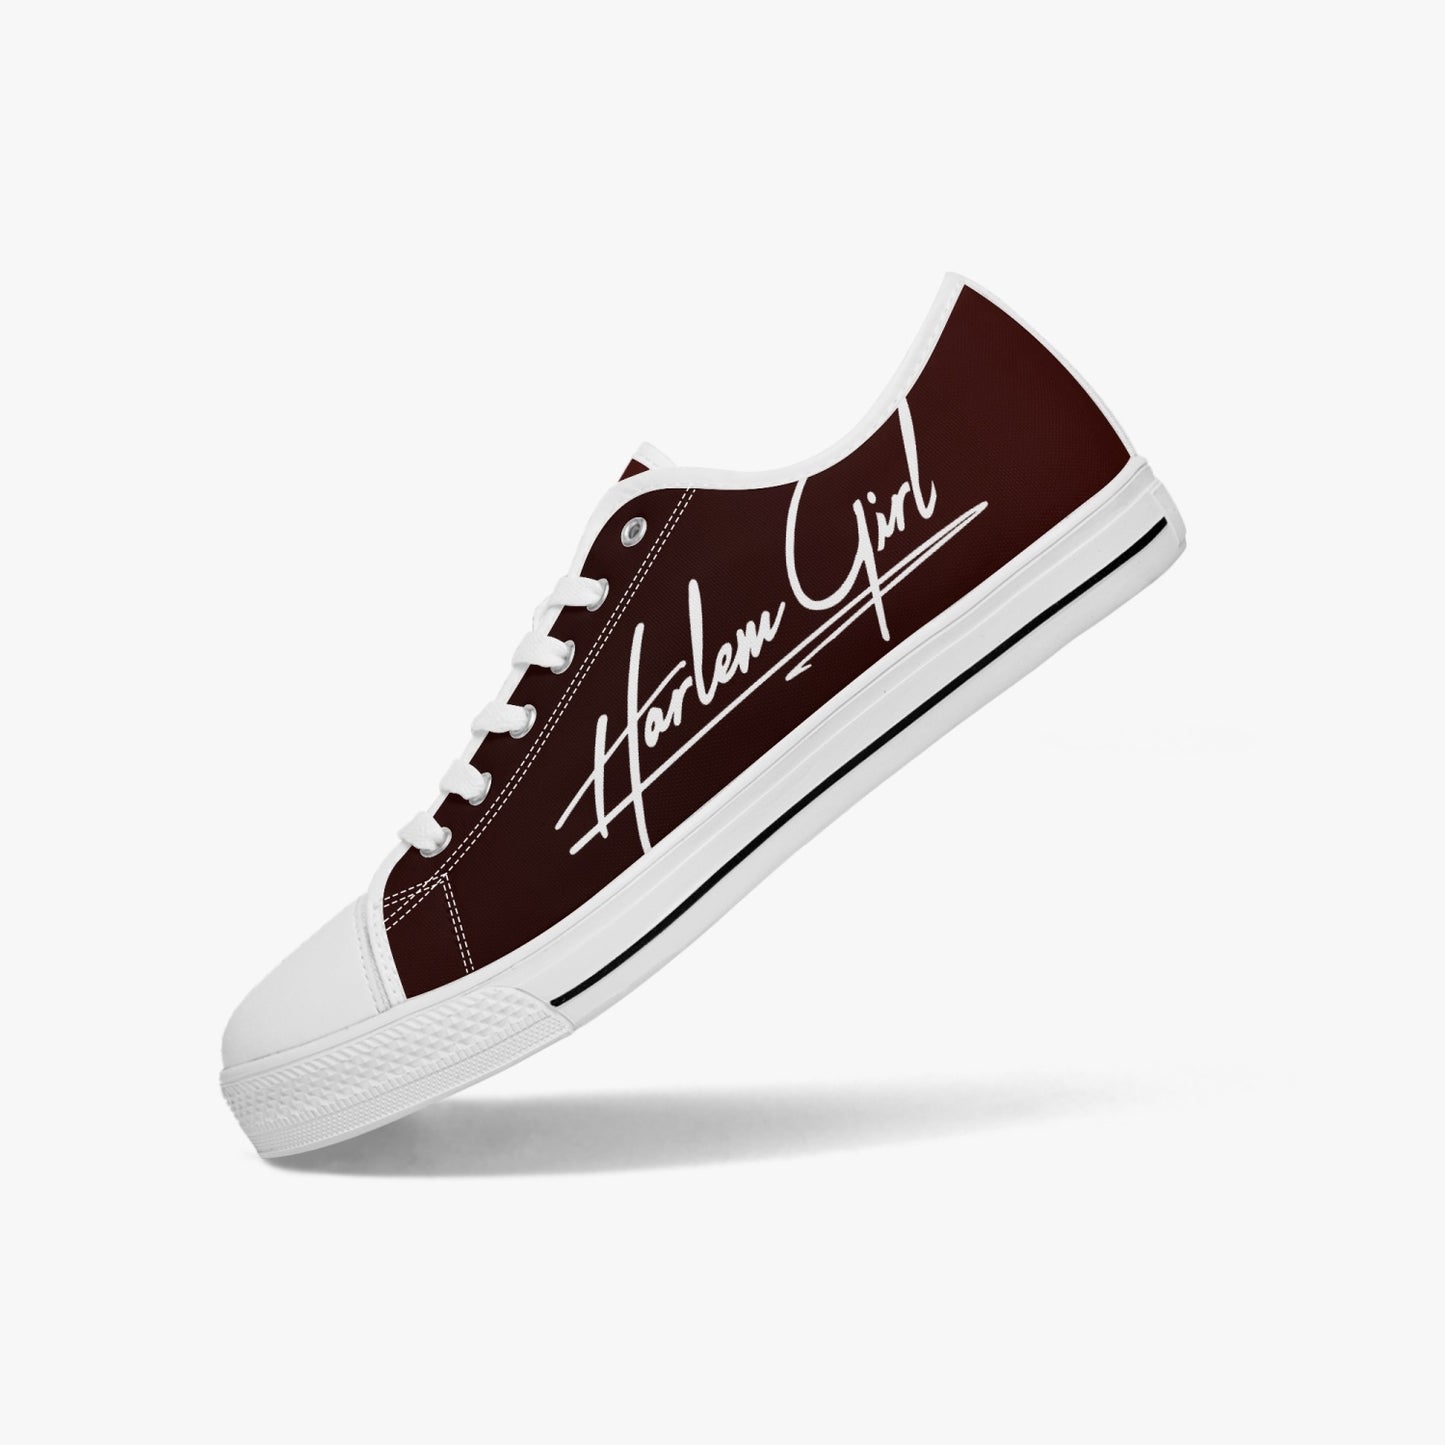 HB Harlem Girl "Lenox Ave" Classic Low Tops - Burnished Mahogany - Women (Black or White Sole)